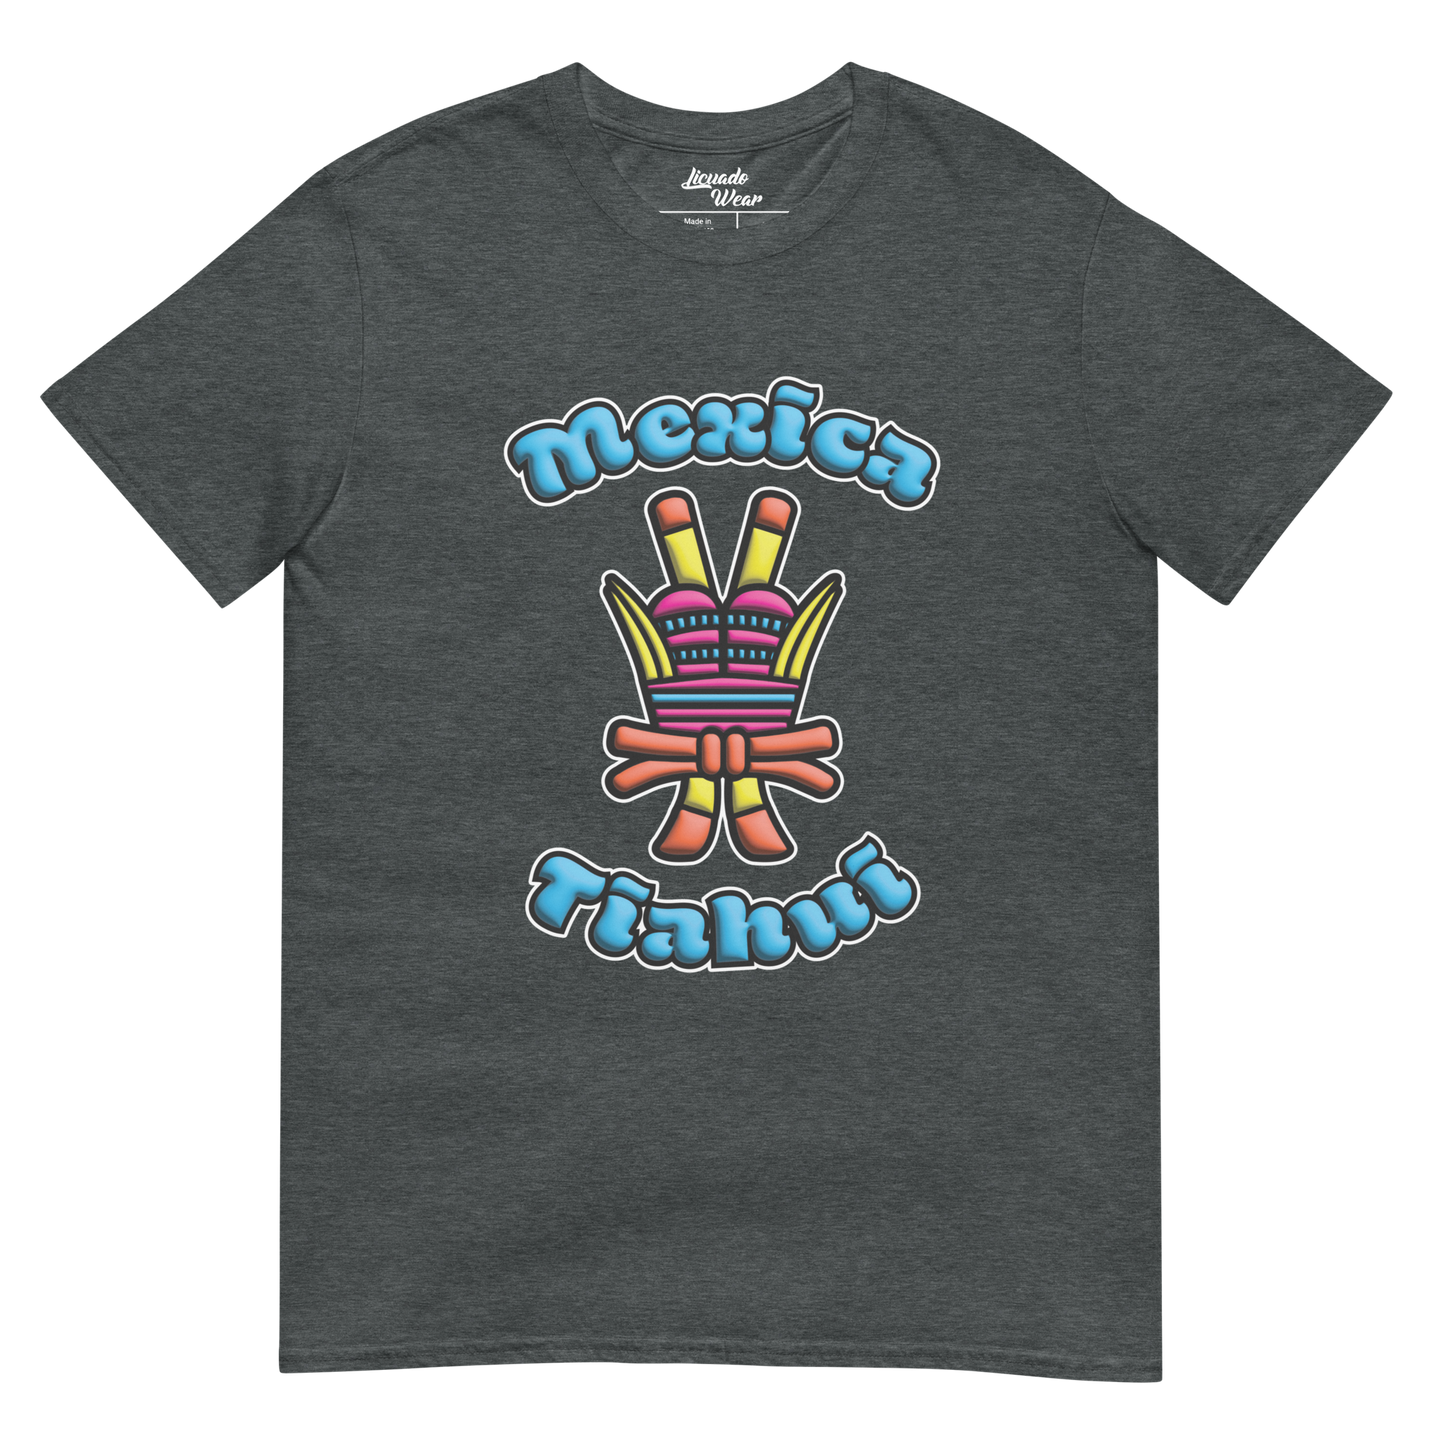 2023 Mexica New Year (Akatl/Reed/11) - Unisex T-Shirt